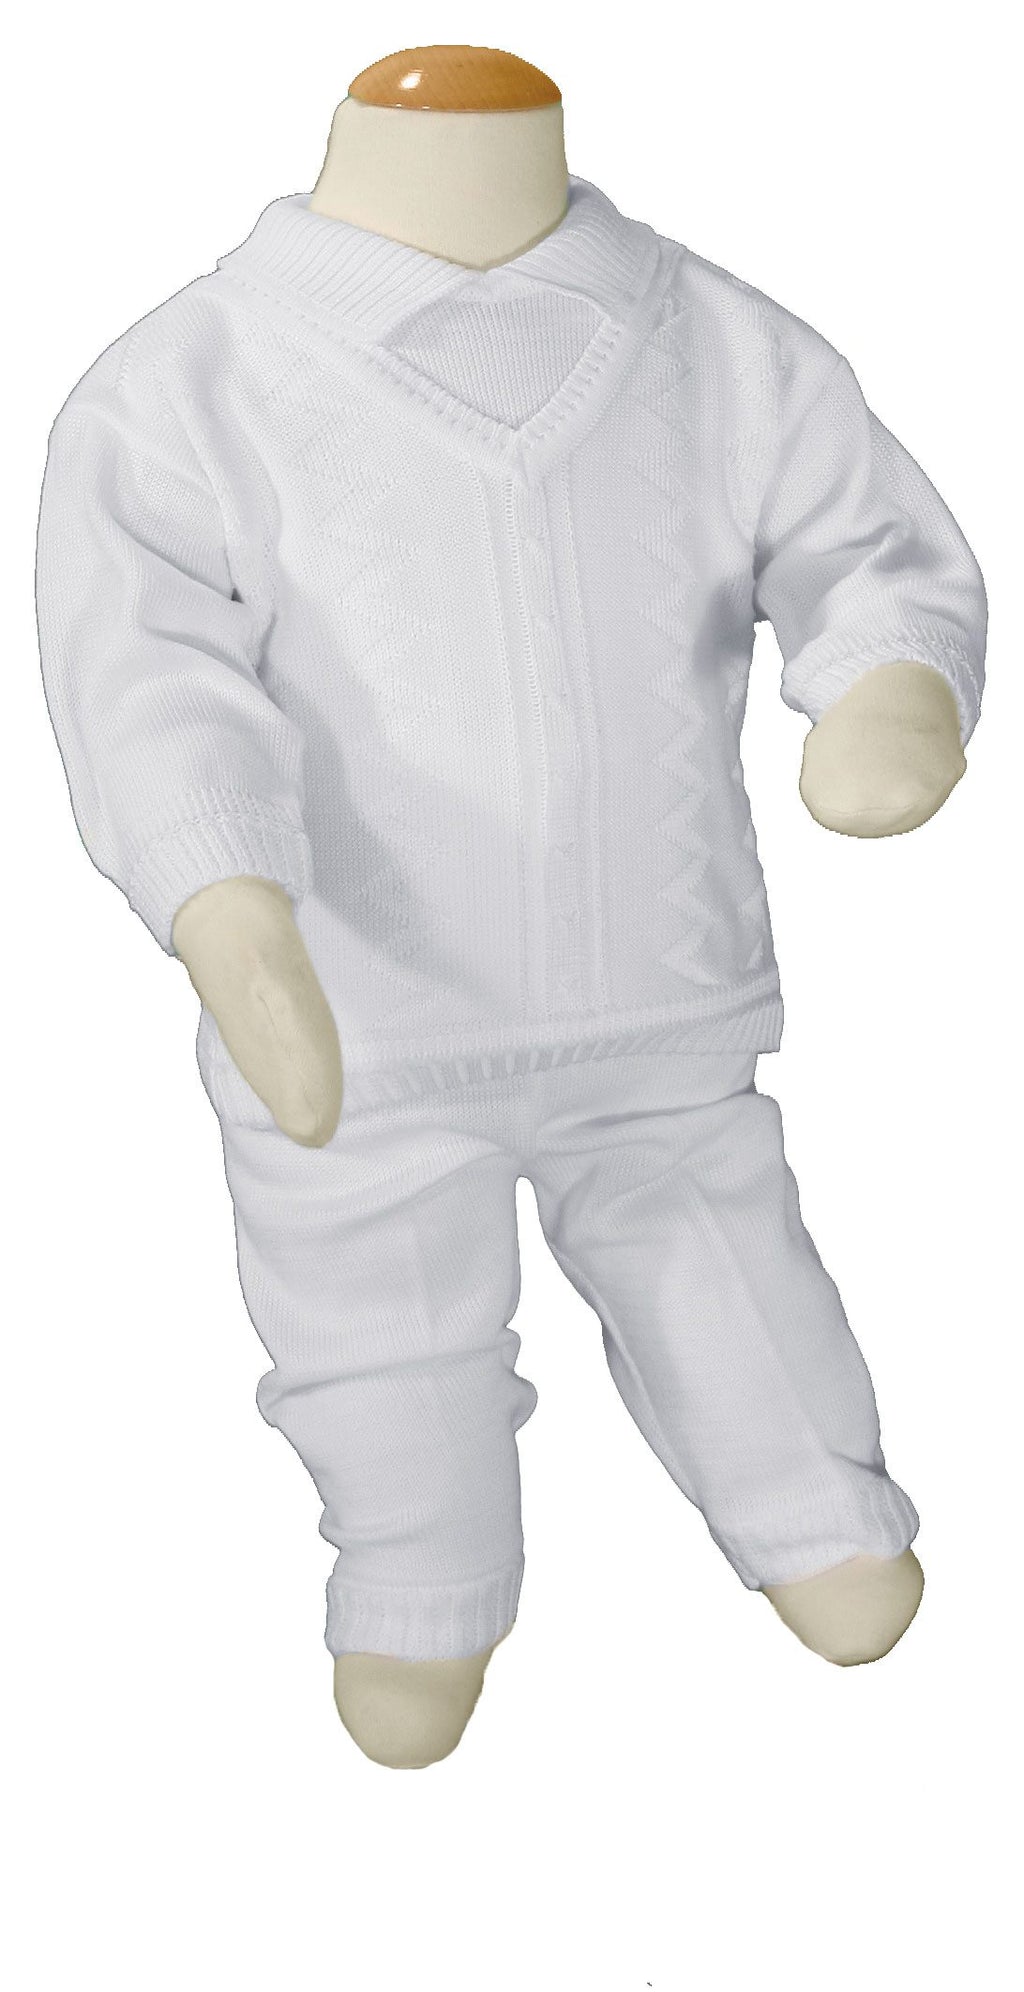 Boys 100% Cotton Knit Two Piece White Christening Baptism Outfit CKNIT2